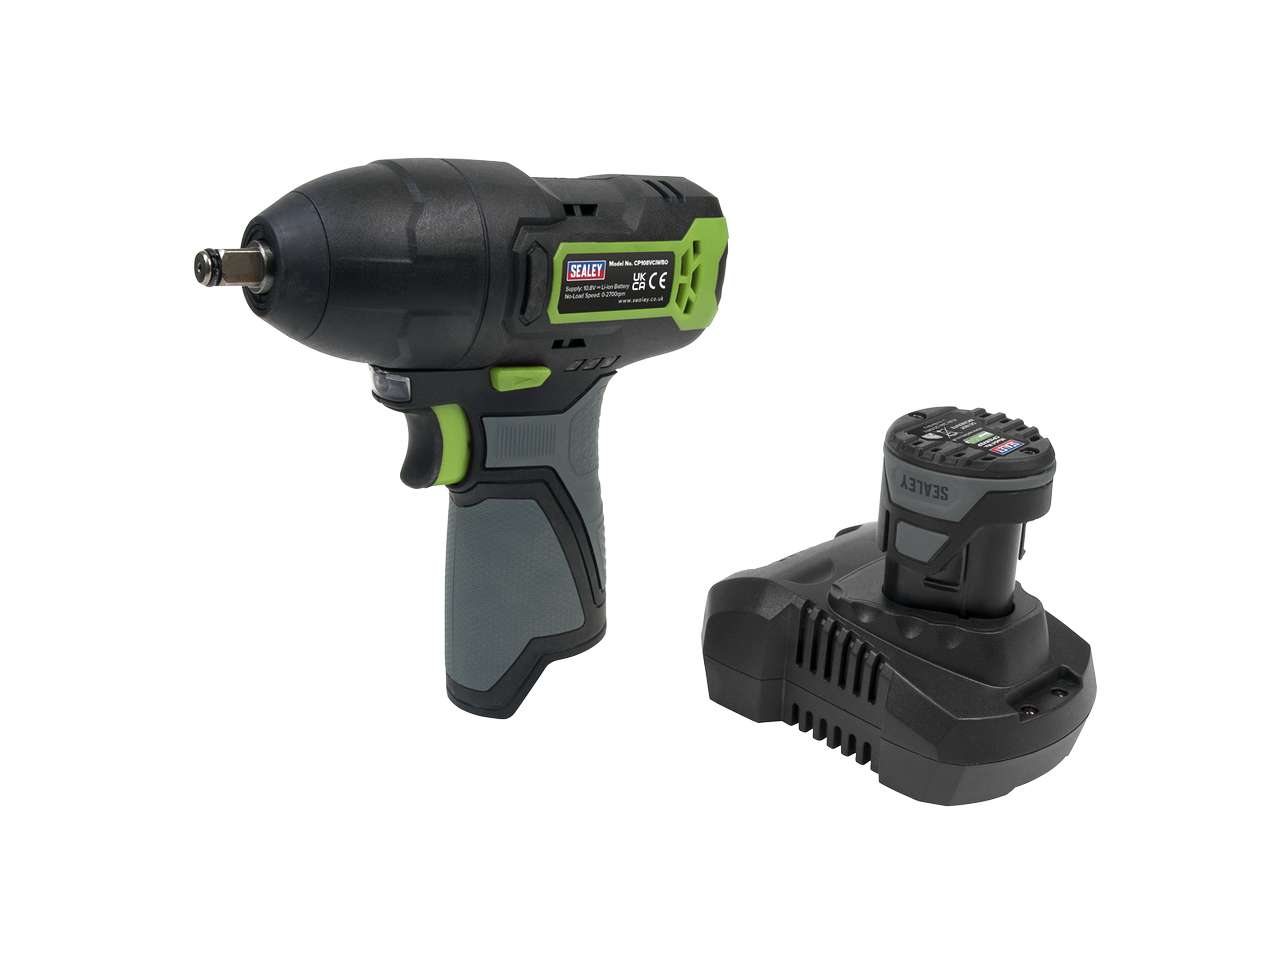 Metabo SSW 18 LTX 600 18v 2x5.5Ah LiHD 600Nm 1/2in Impact Wrench